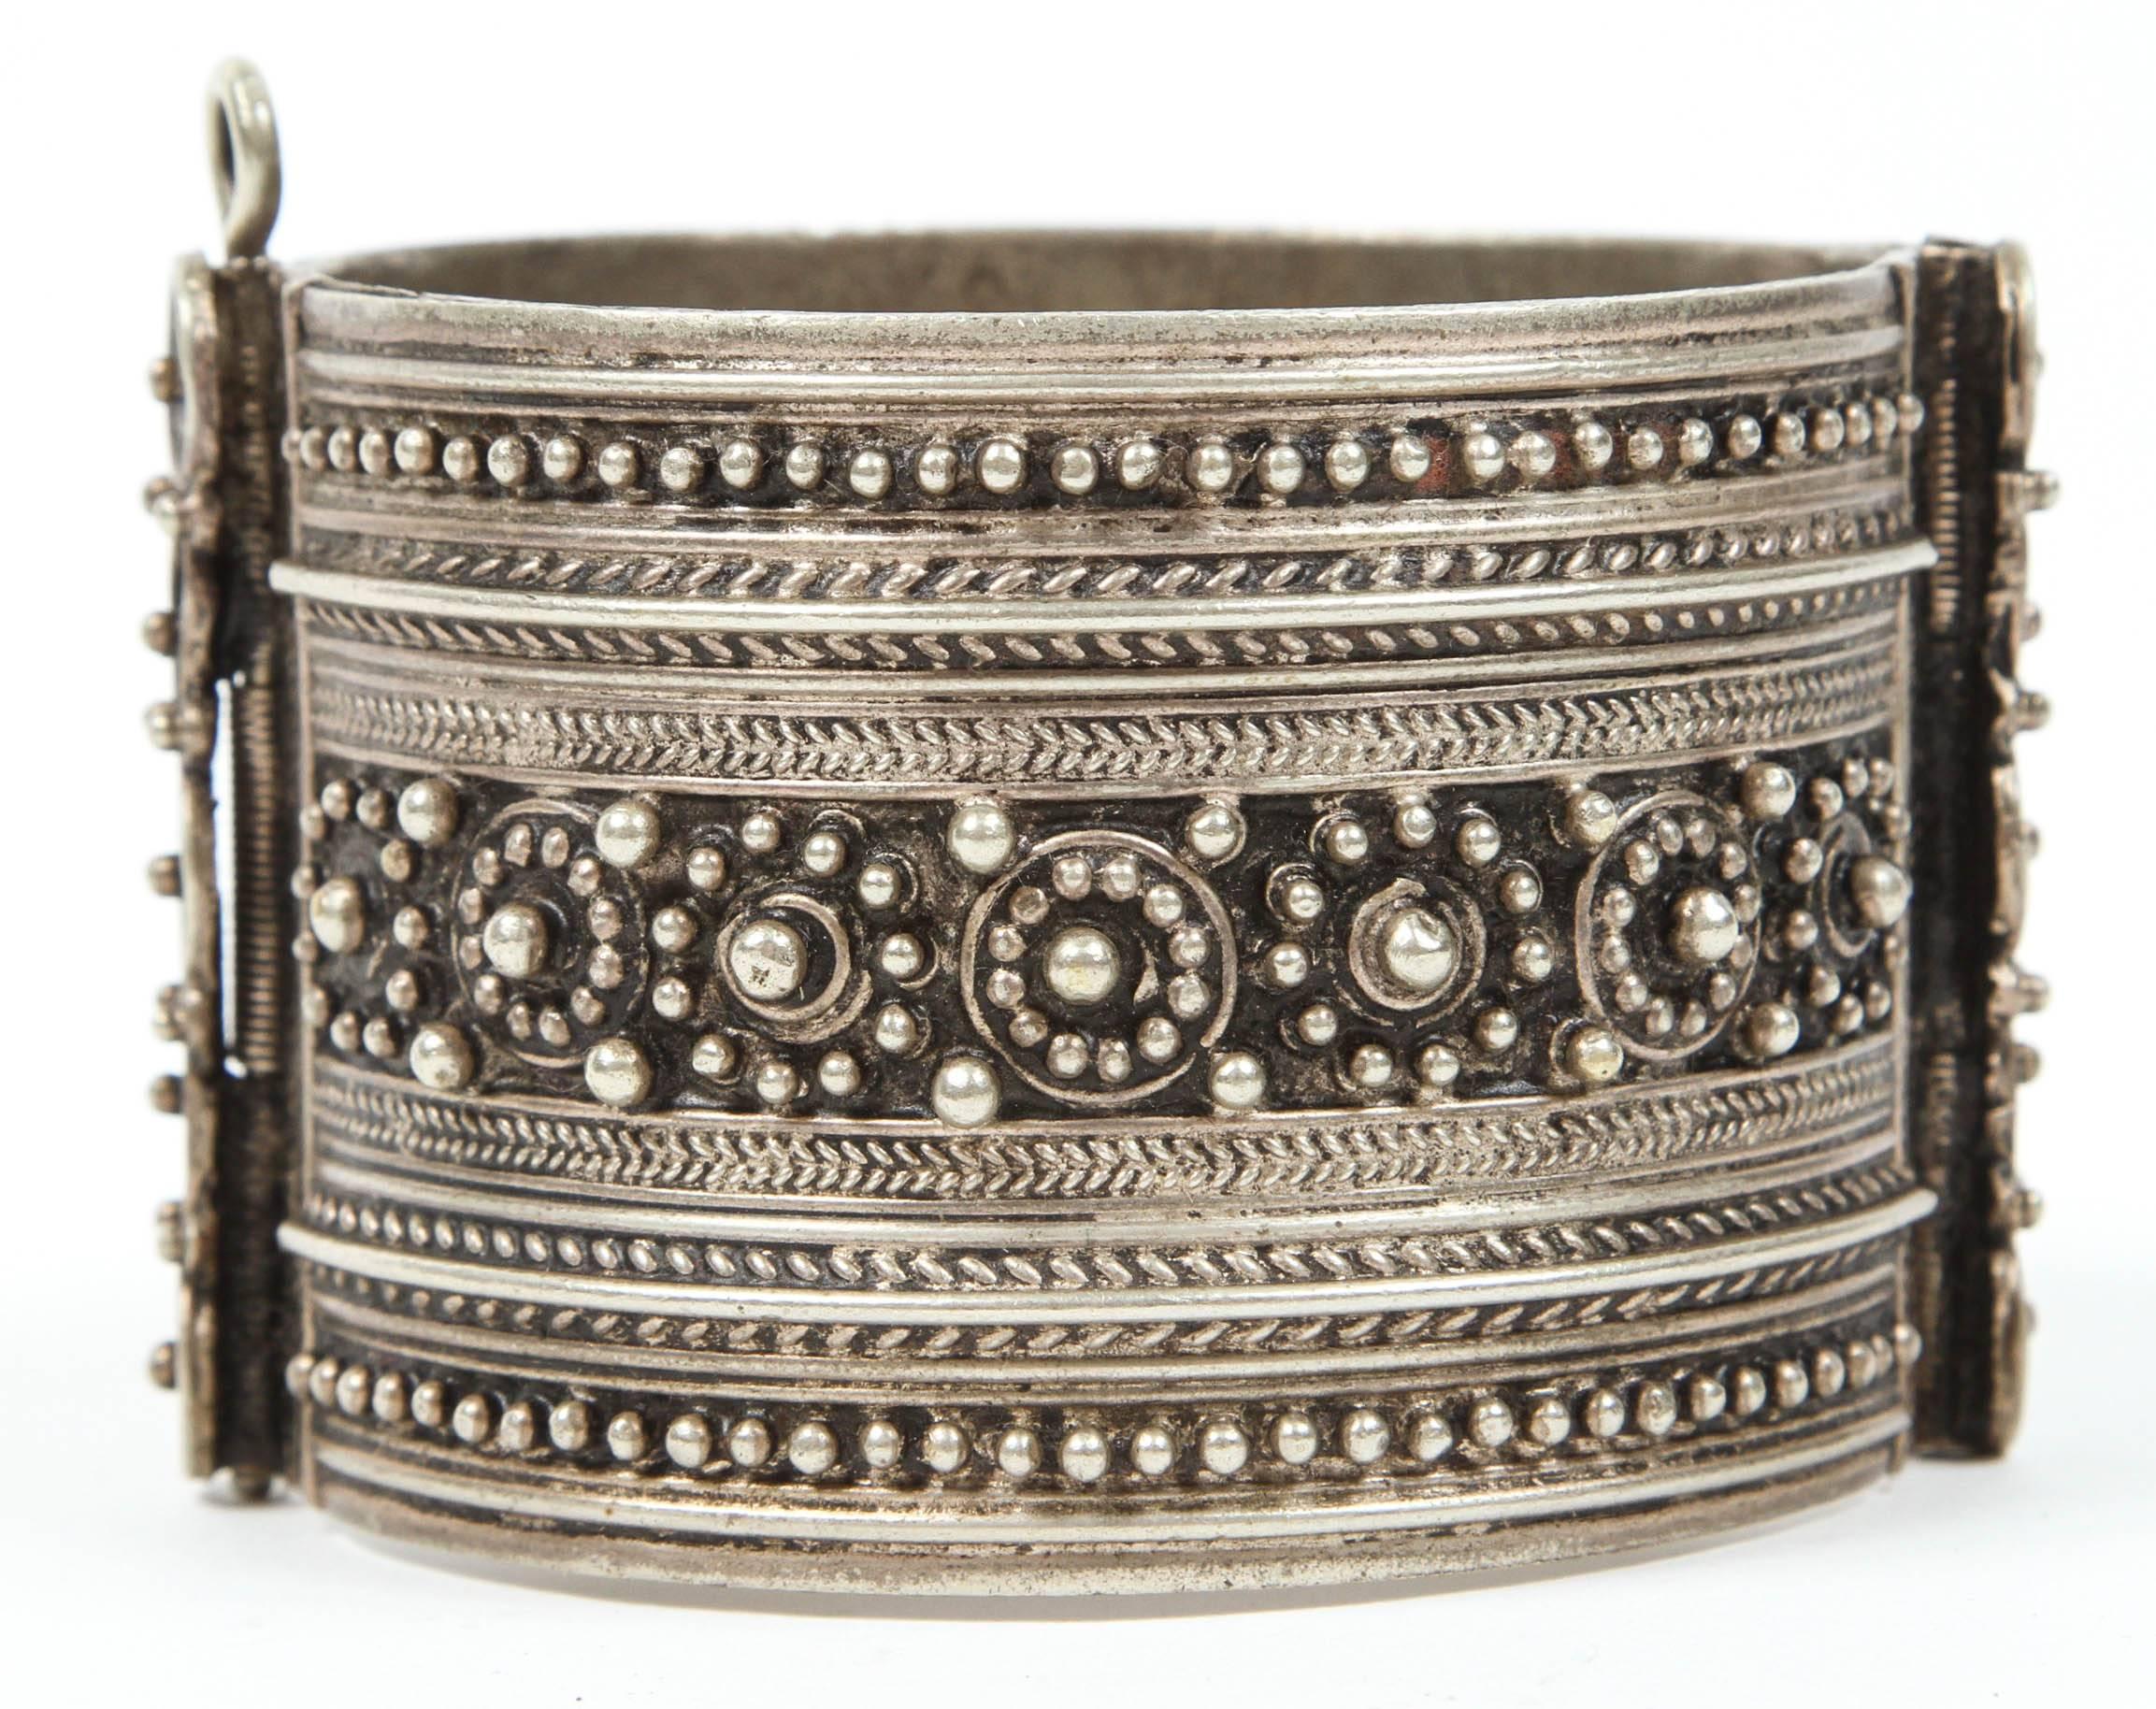 Vintage Moroccan Berber tribal bracelet Moroccan tribal bracelet from the High Atlas of Morocco. Handcrafted by Berber women using Moroccan silver nickel. The ethnic Nomadic and Bedouin jewelry from the Maghreb and North Africa is usually made of